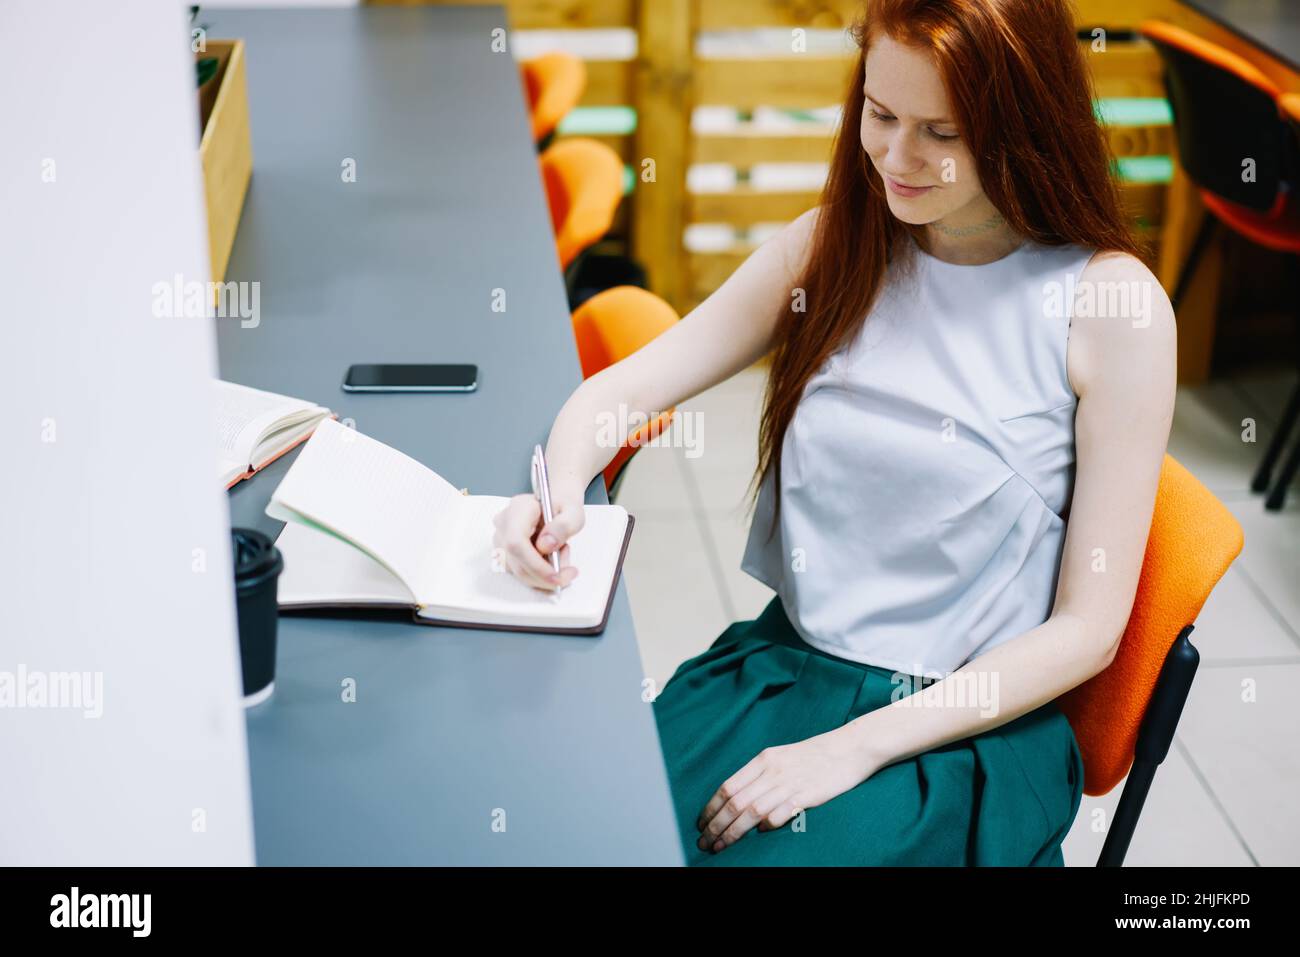 Young lady writing notes while sitting in chair Stock Photo